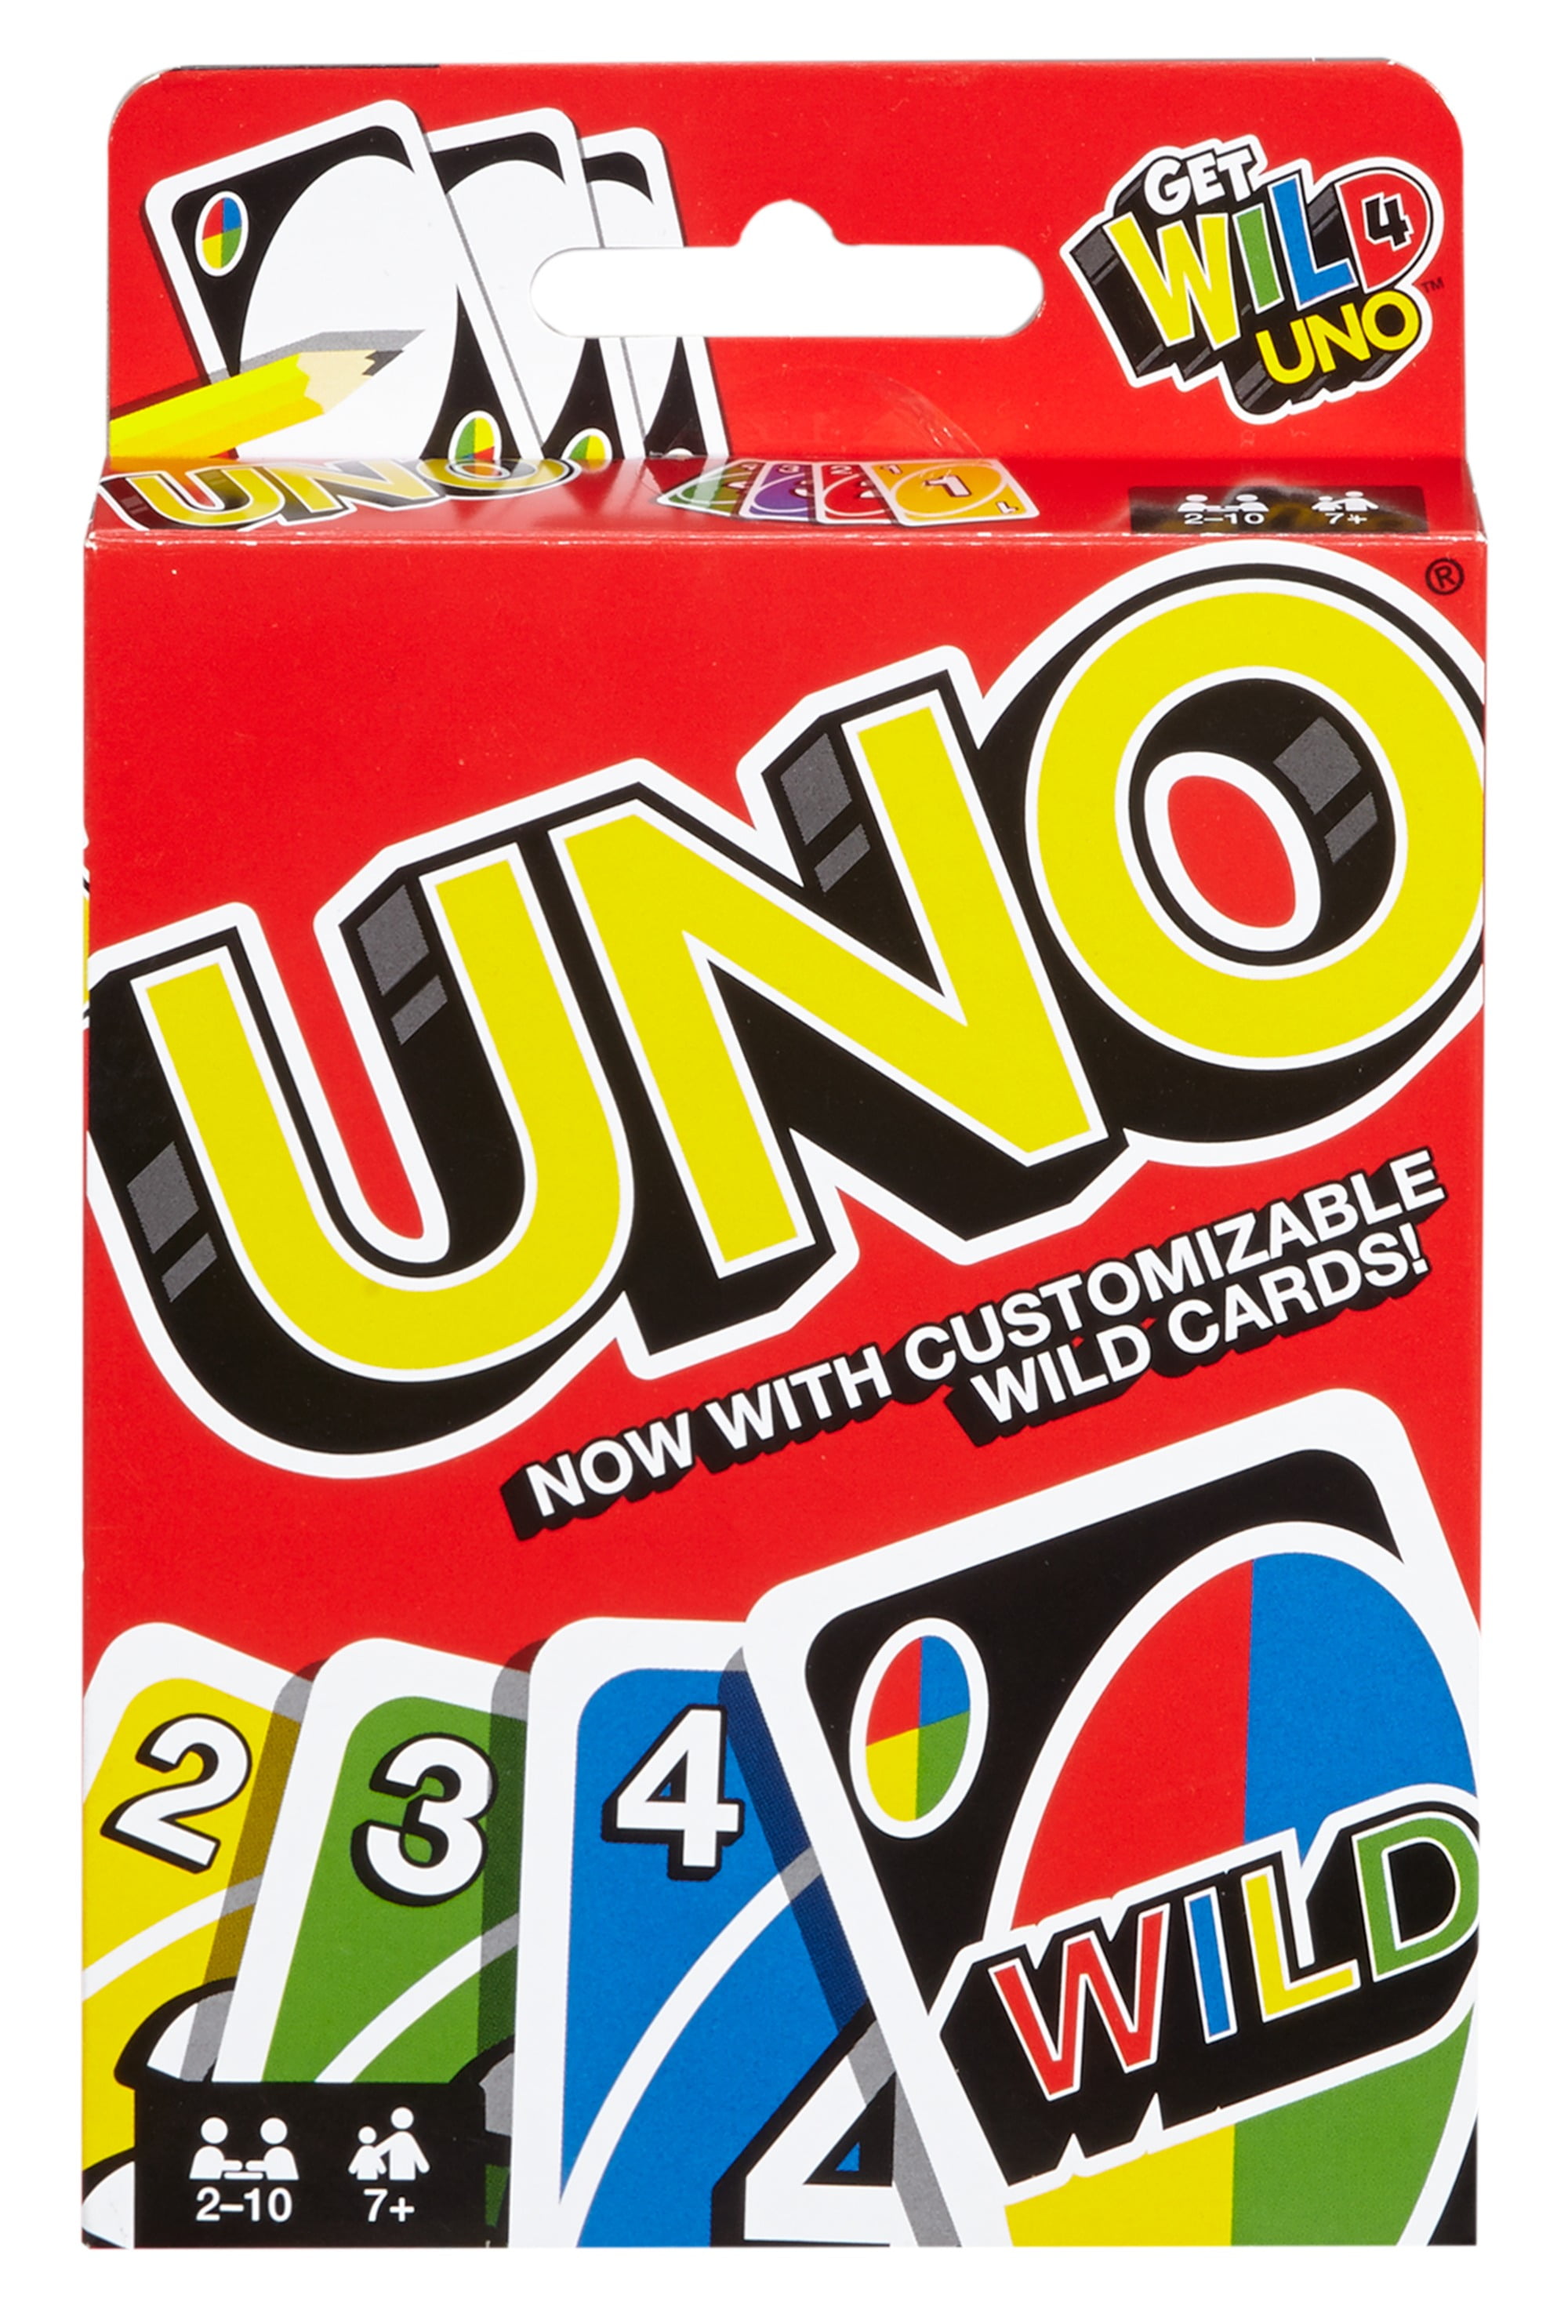 UNO Classic Card Game Matching Colors and Numbers Fun For Family for sale online